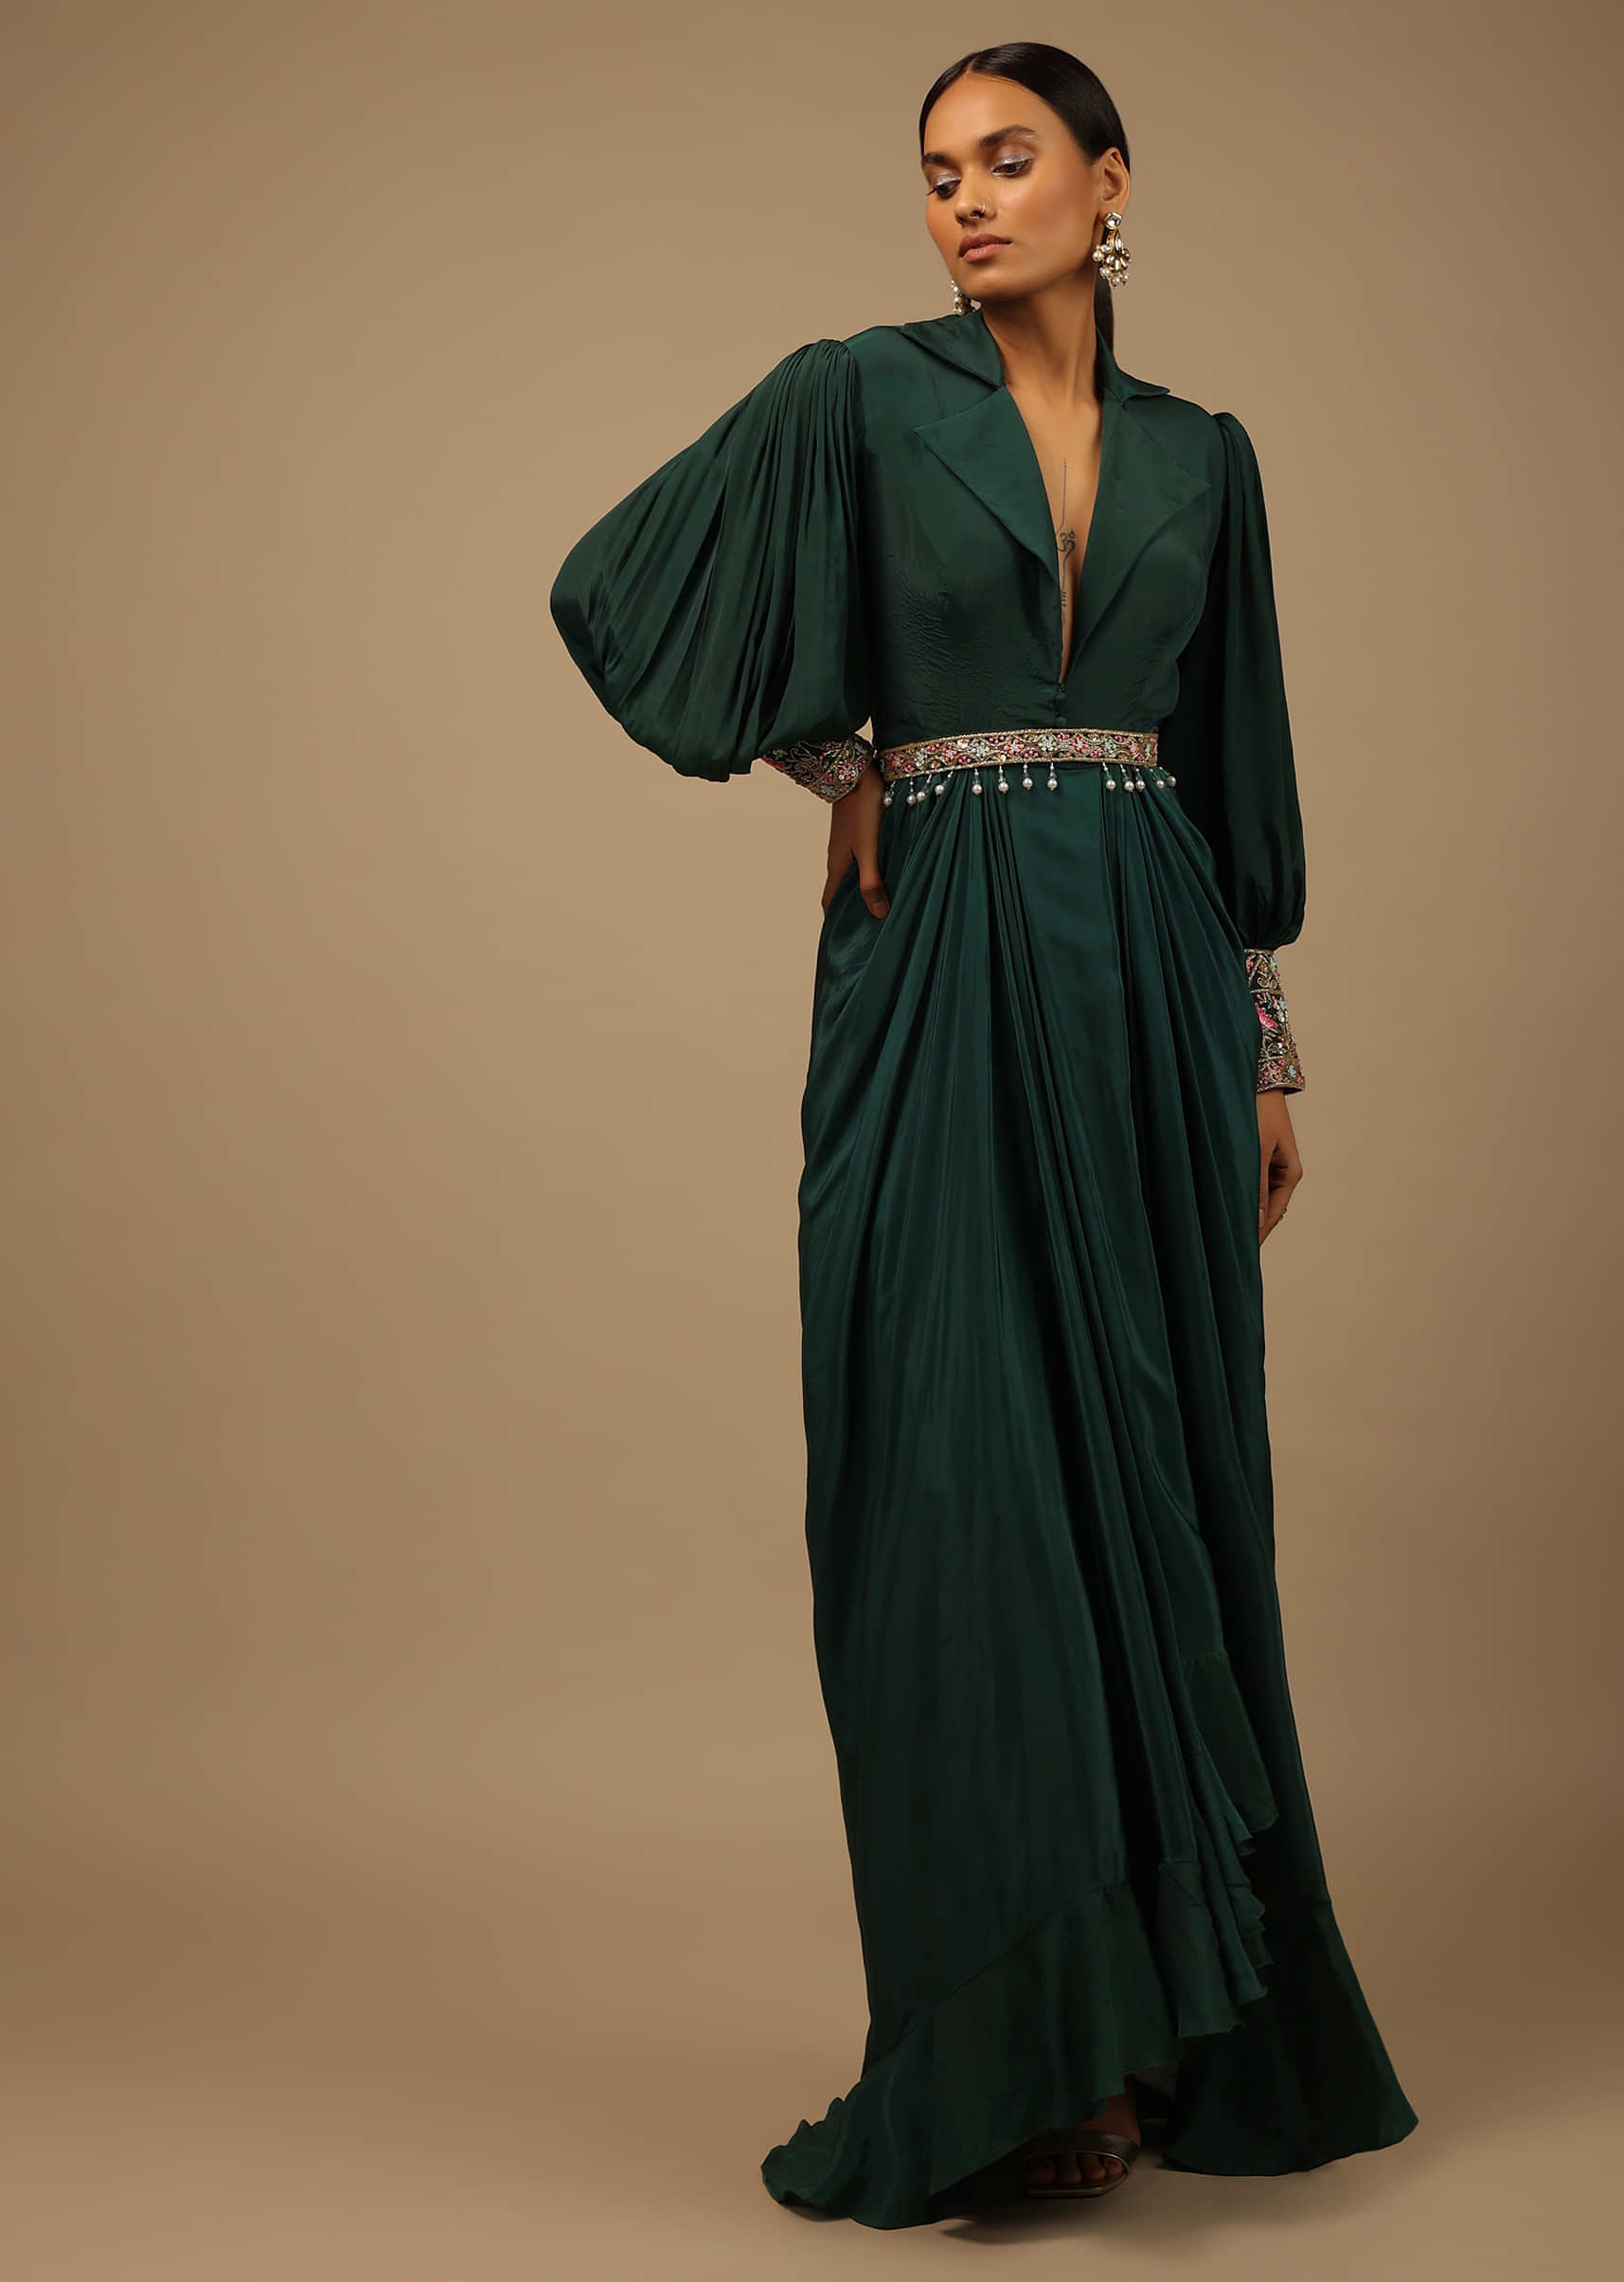 Dark Pine Green High Low Gown With Collar Neckline, Bishop Sleeves And Multicolor Handwork On The Cuffs